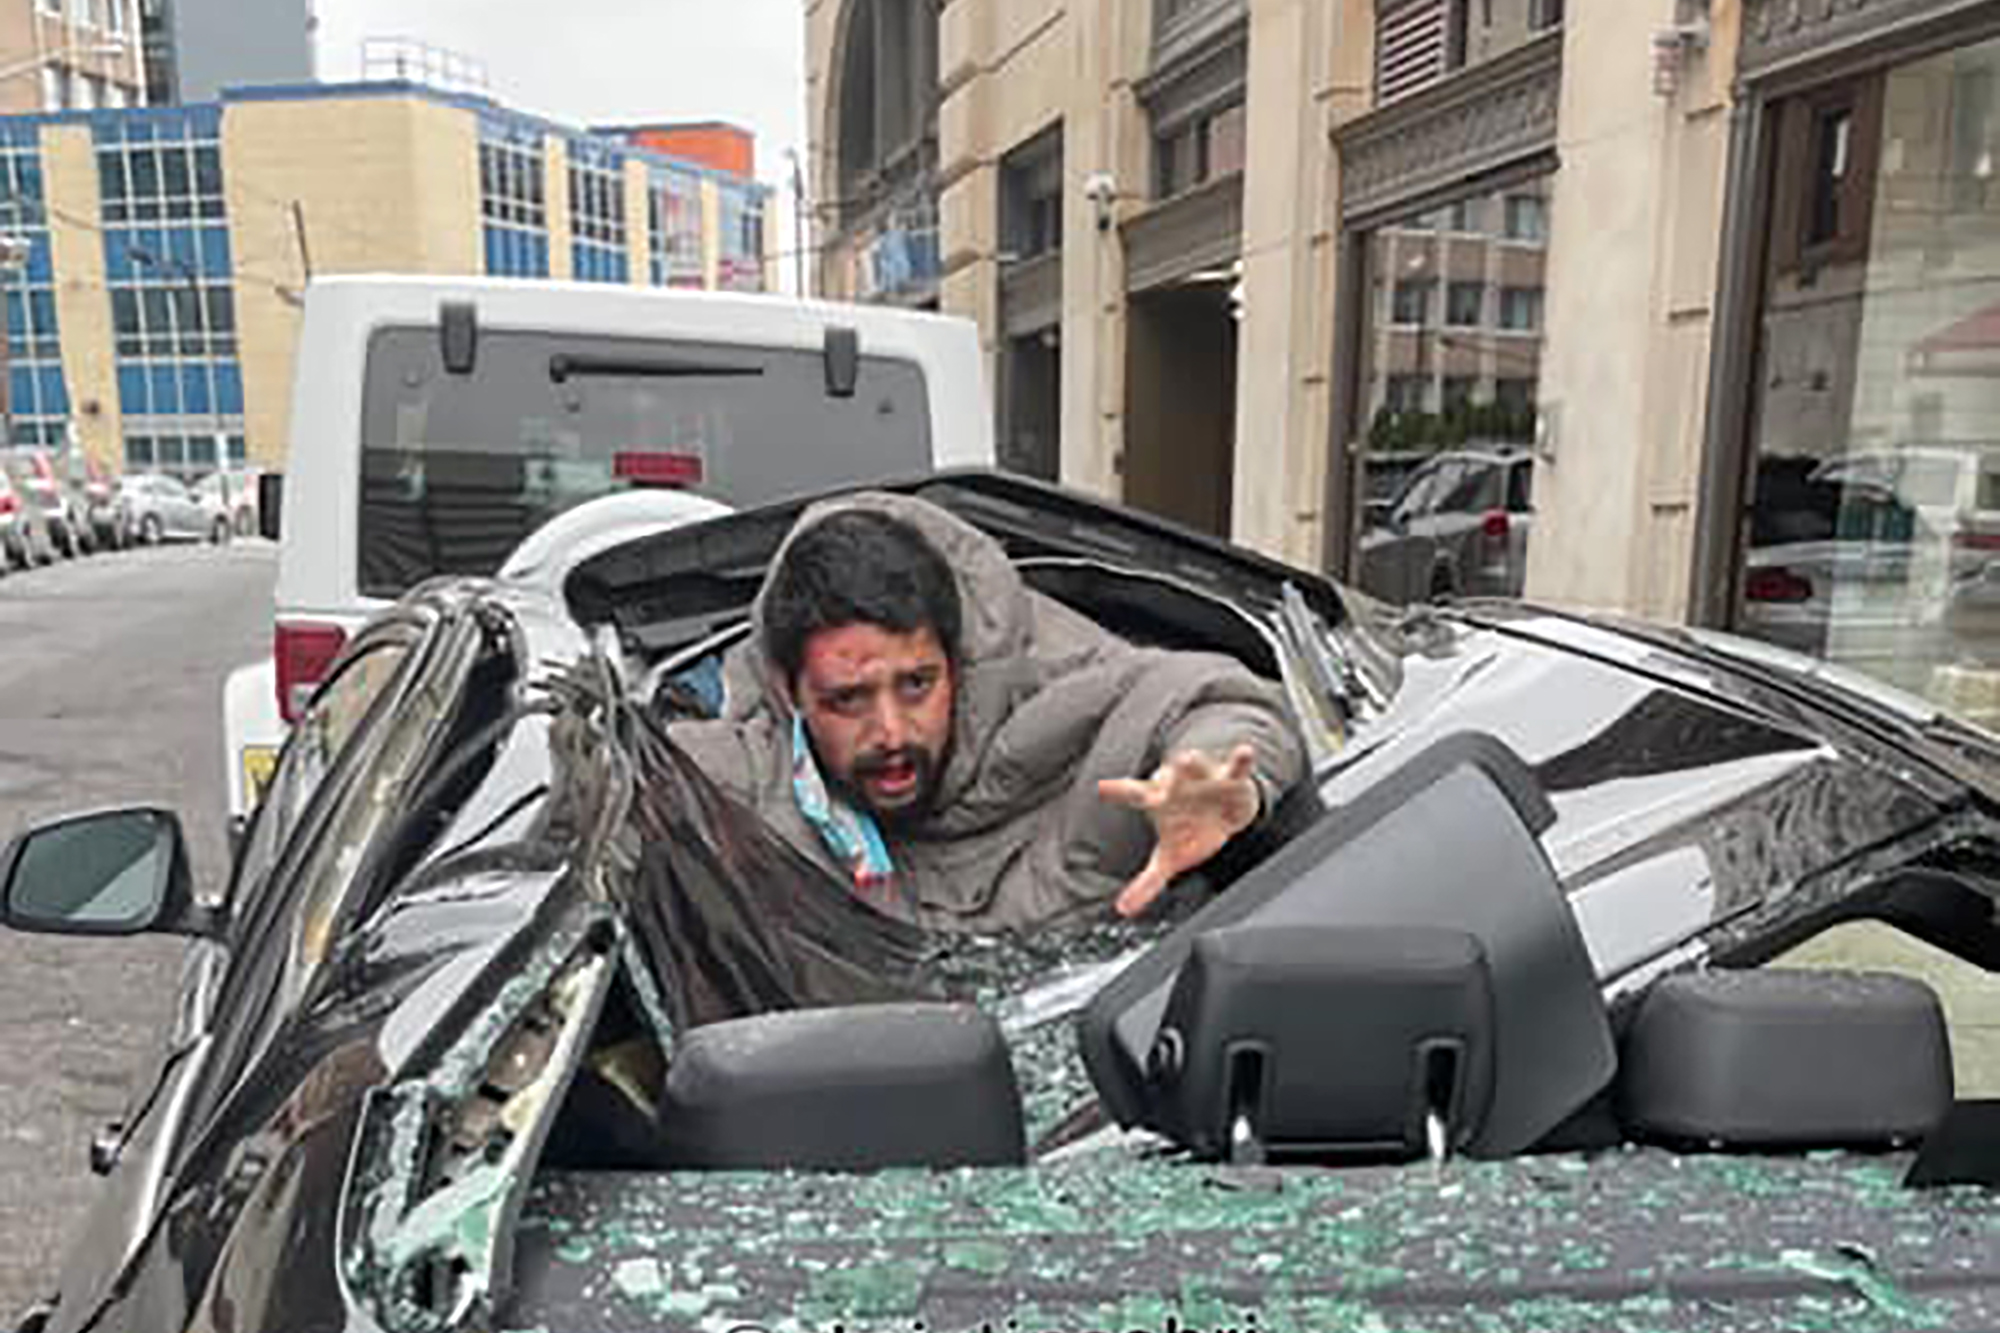 A man plunged nine stories from a skyscraper, crashed through the roof of a BMW and miraculously survived